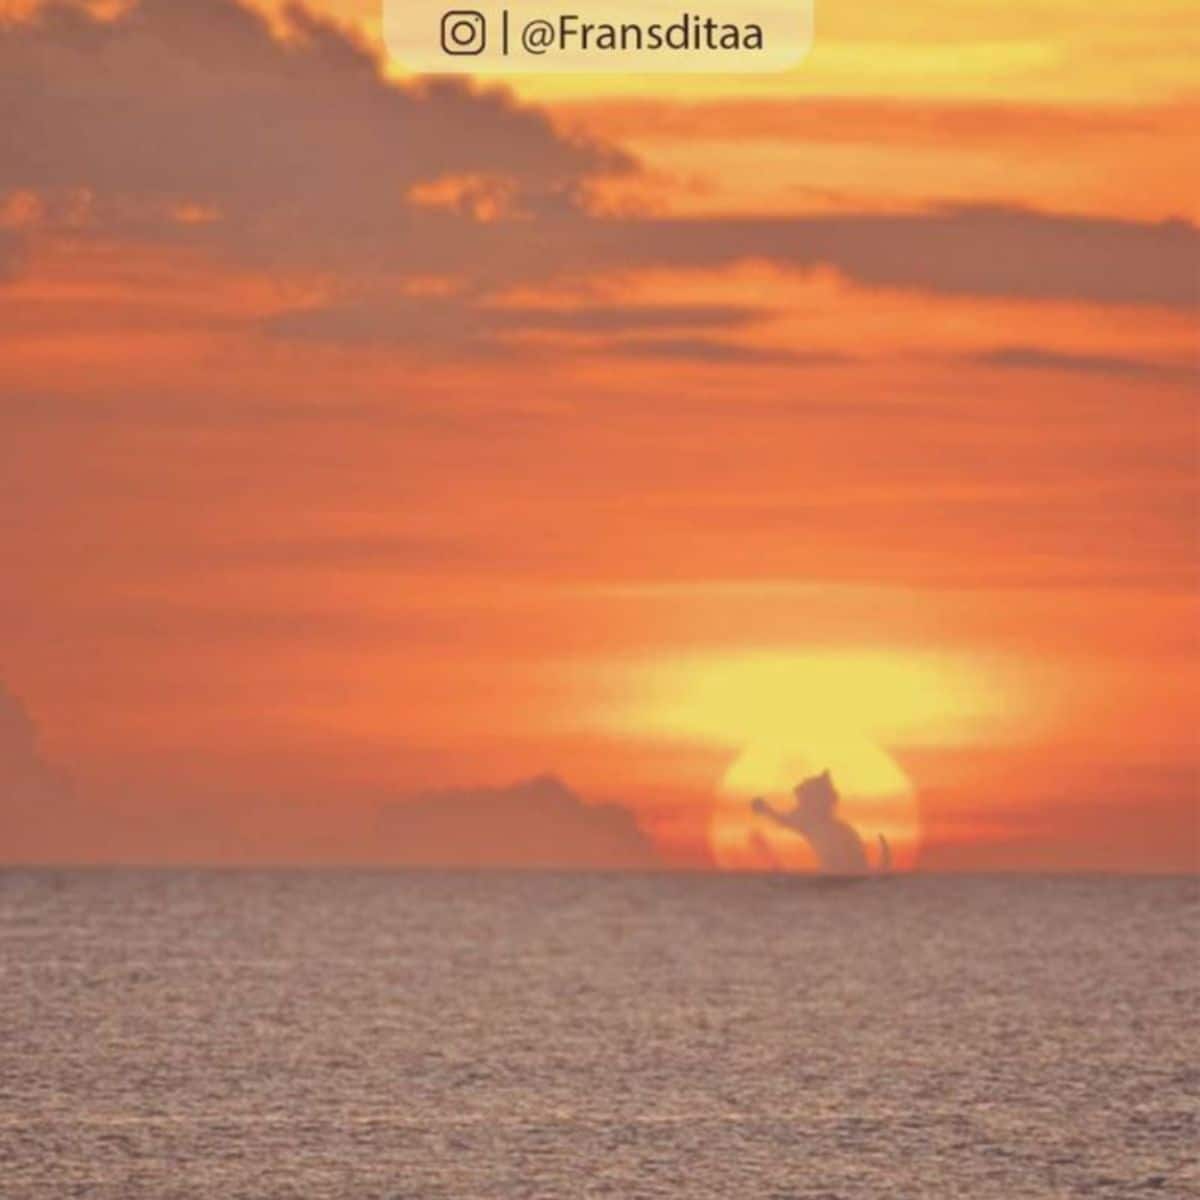 a sunset by the ocean with an orange sky with a giant photoshopped cat inside the yellow sun with the cat reaching up to swat clouds